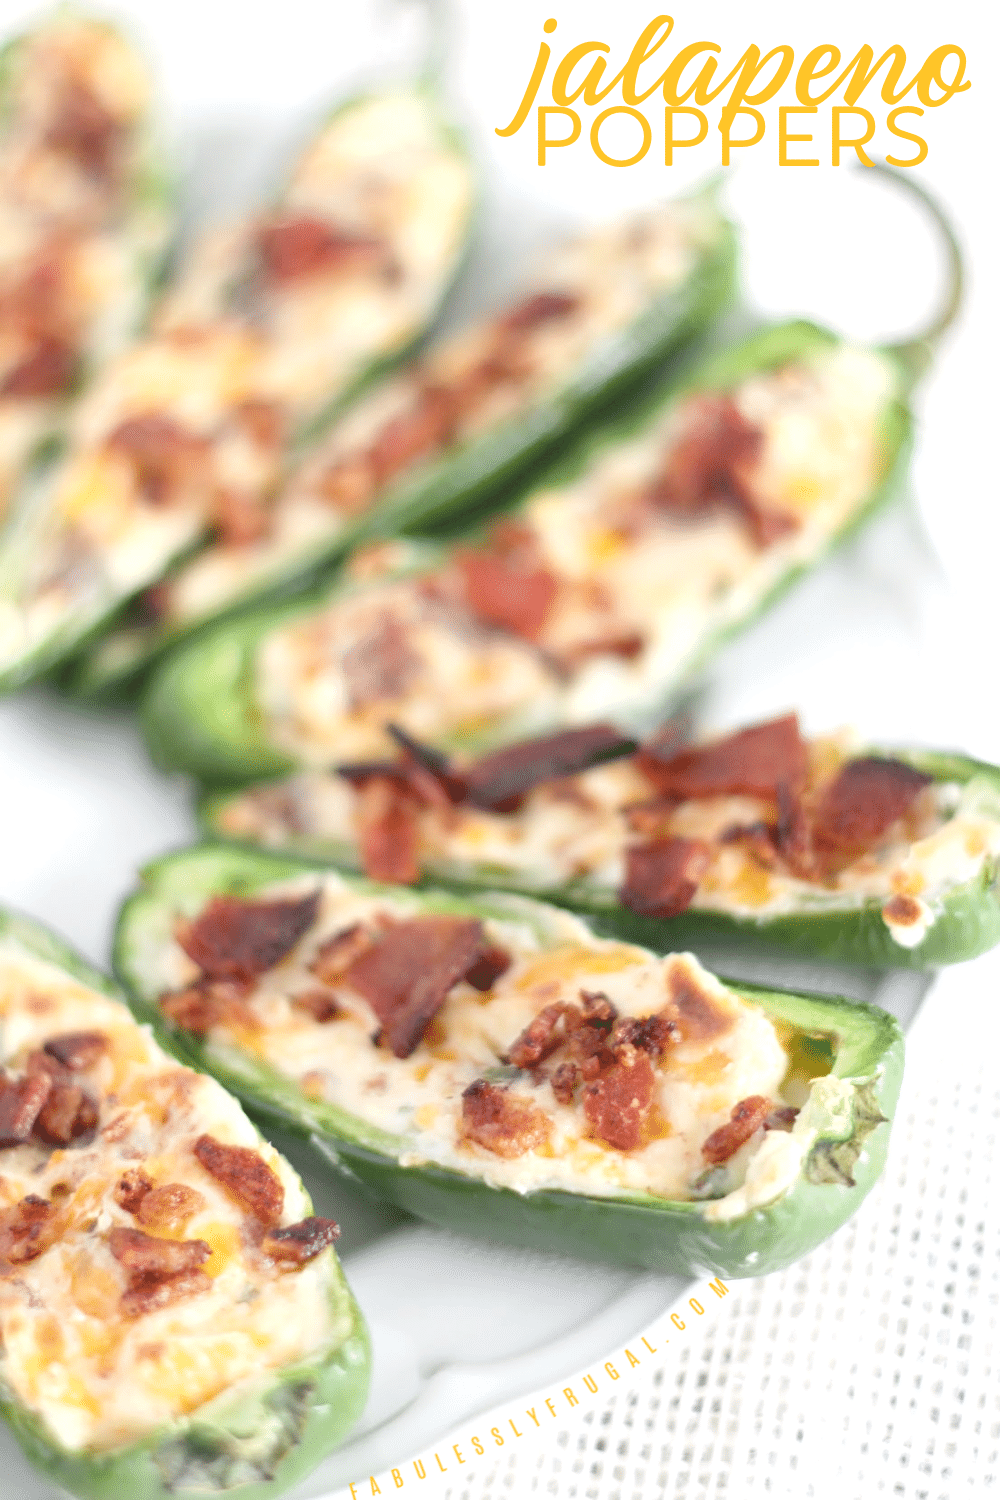 Easy 30-Minute Jalapeno Poppers (with Bacon!) - Fabulessly Frugal